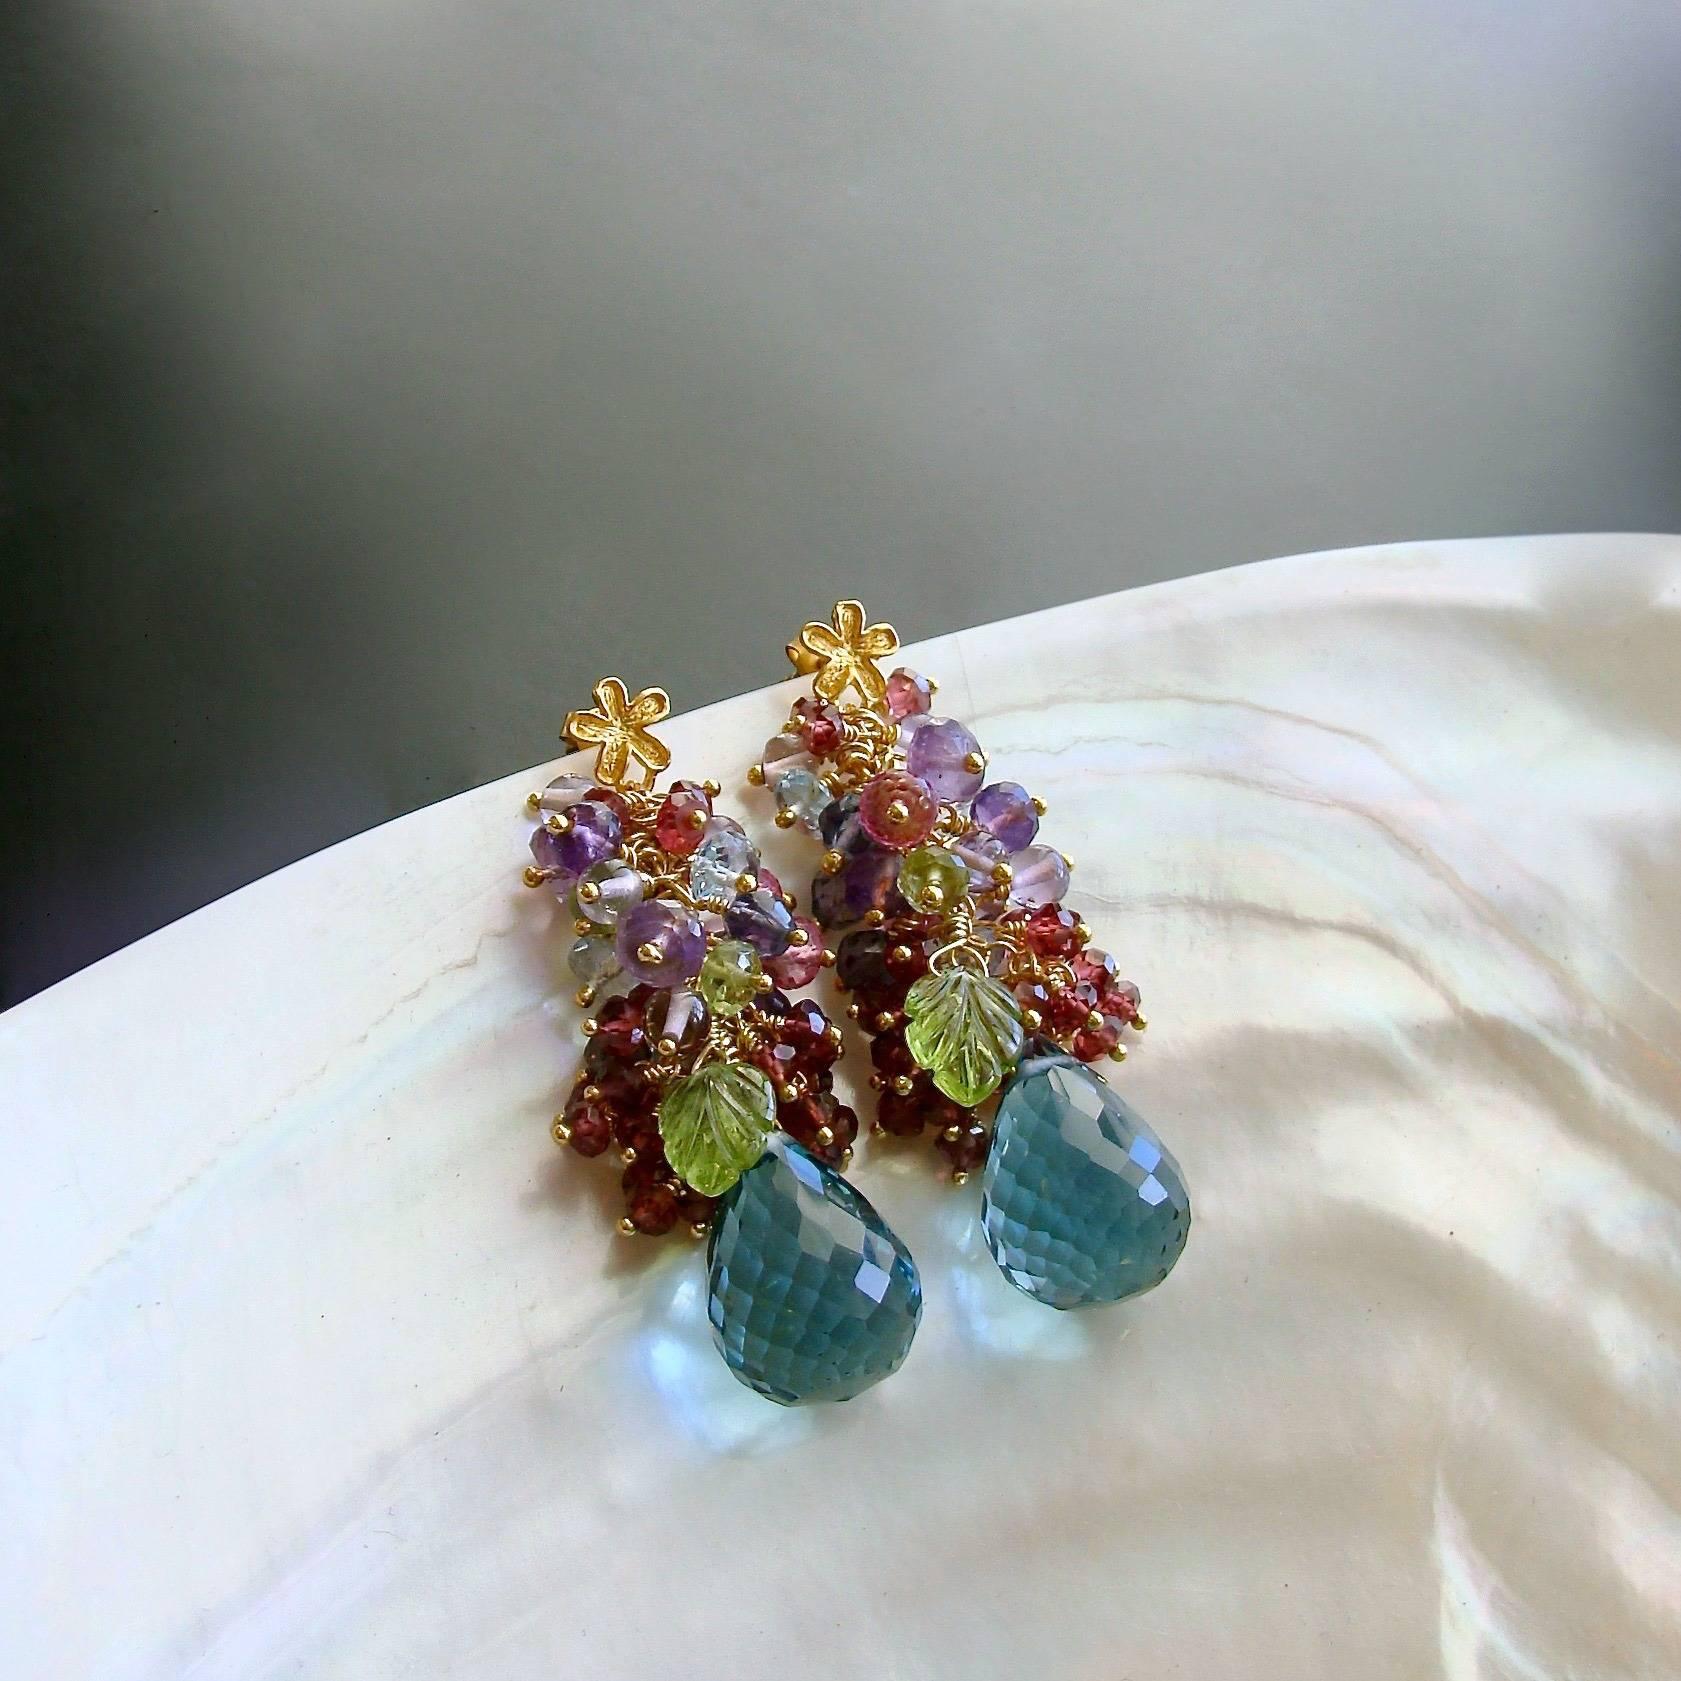 Fleur Earrings.

After a harsh and cold winter, everyone is ready for the happy colors of spring and these earrings don’t disappoint.  A cacophony of spring colors continues to be mixed with the darker colors of the garden, for a jaw dropping